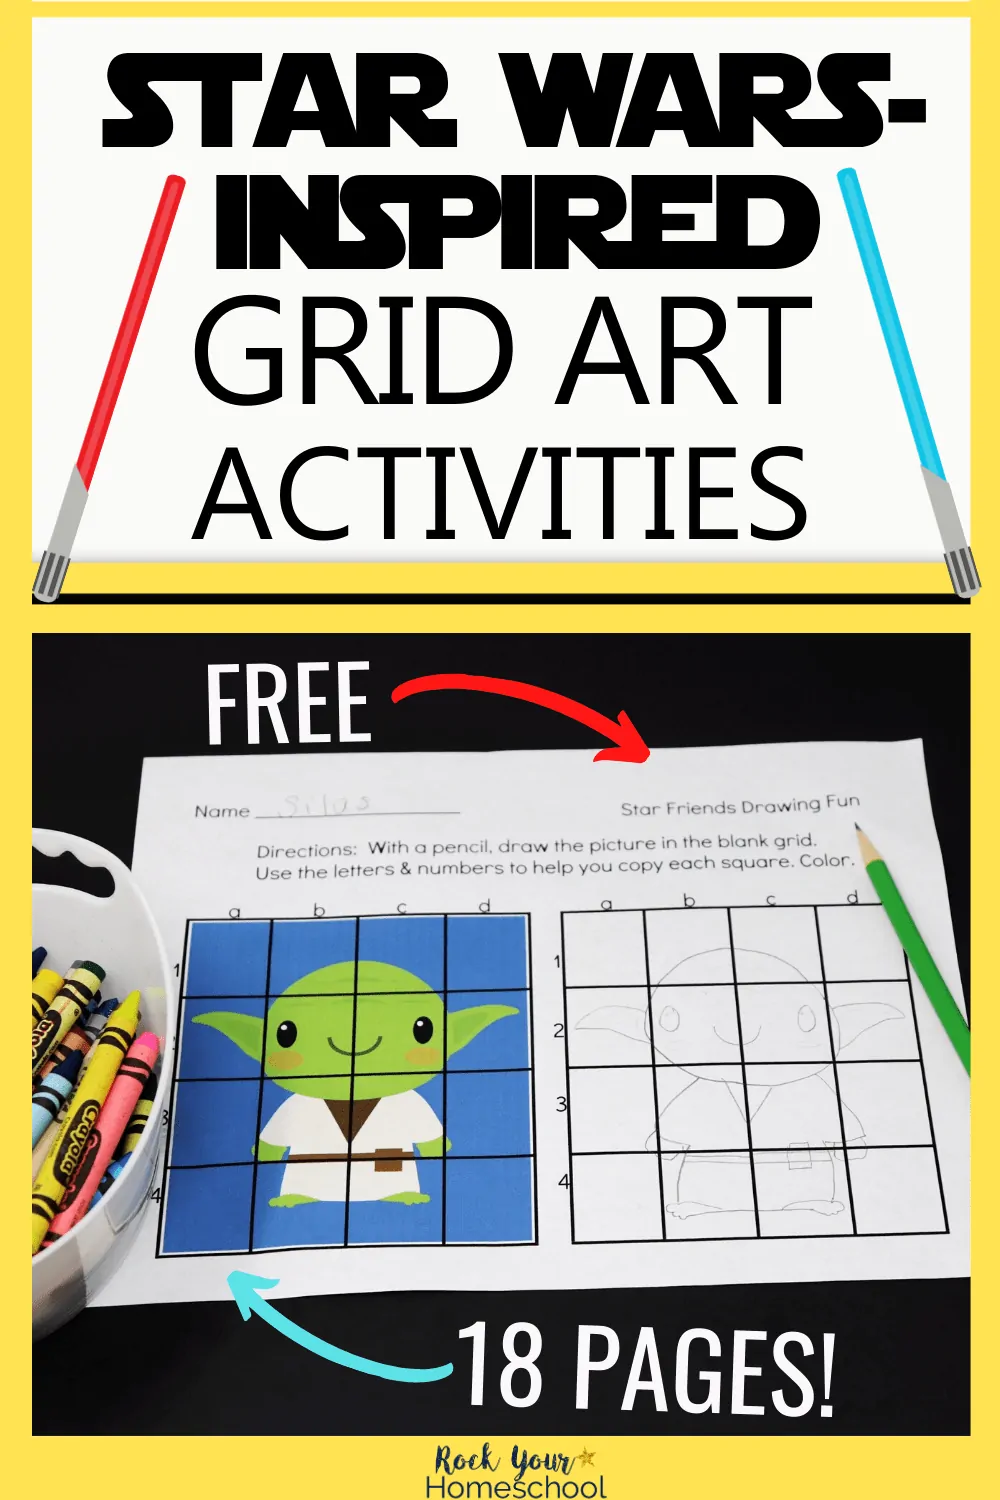 Fantastic Fun with Free Star Wars-Inspired Grid Art Activities